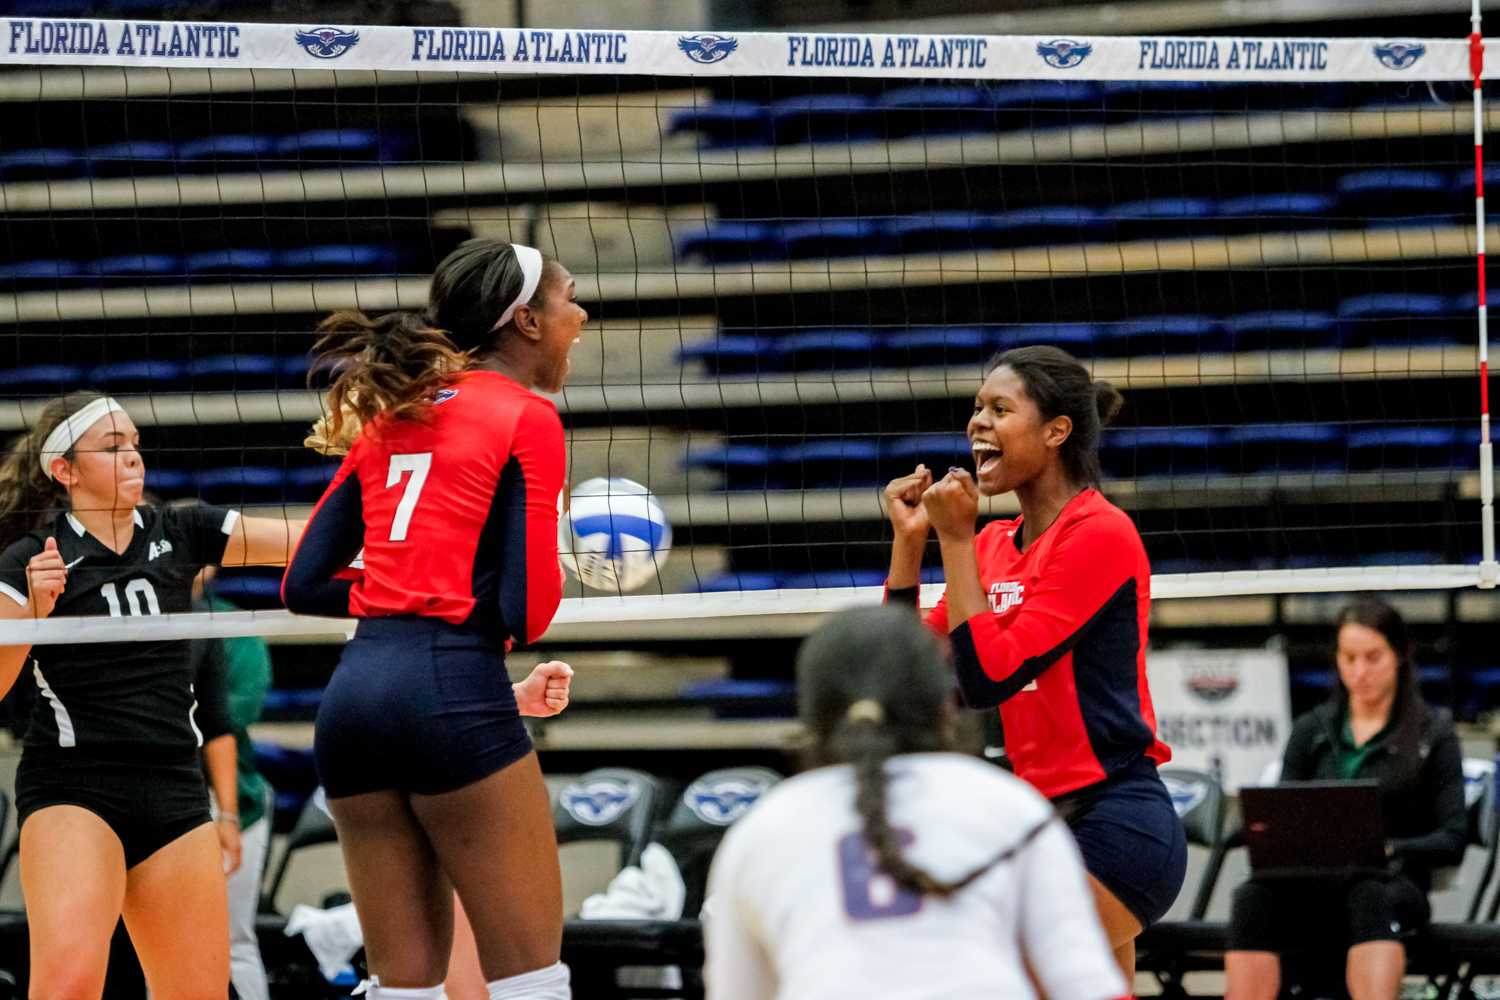 Middle blocker Brittney Brown (left) and opposite hitter Gabrielle Dixon (right) celebrate after earning a point for the Owls. Mohammed F Emran | Staff Photographer